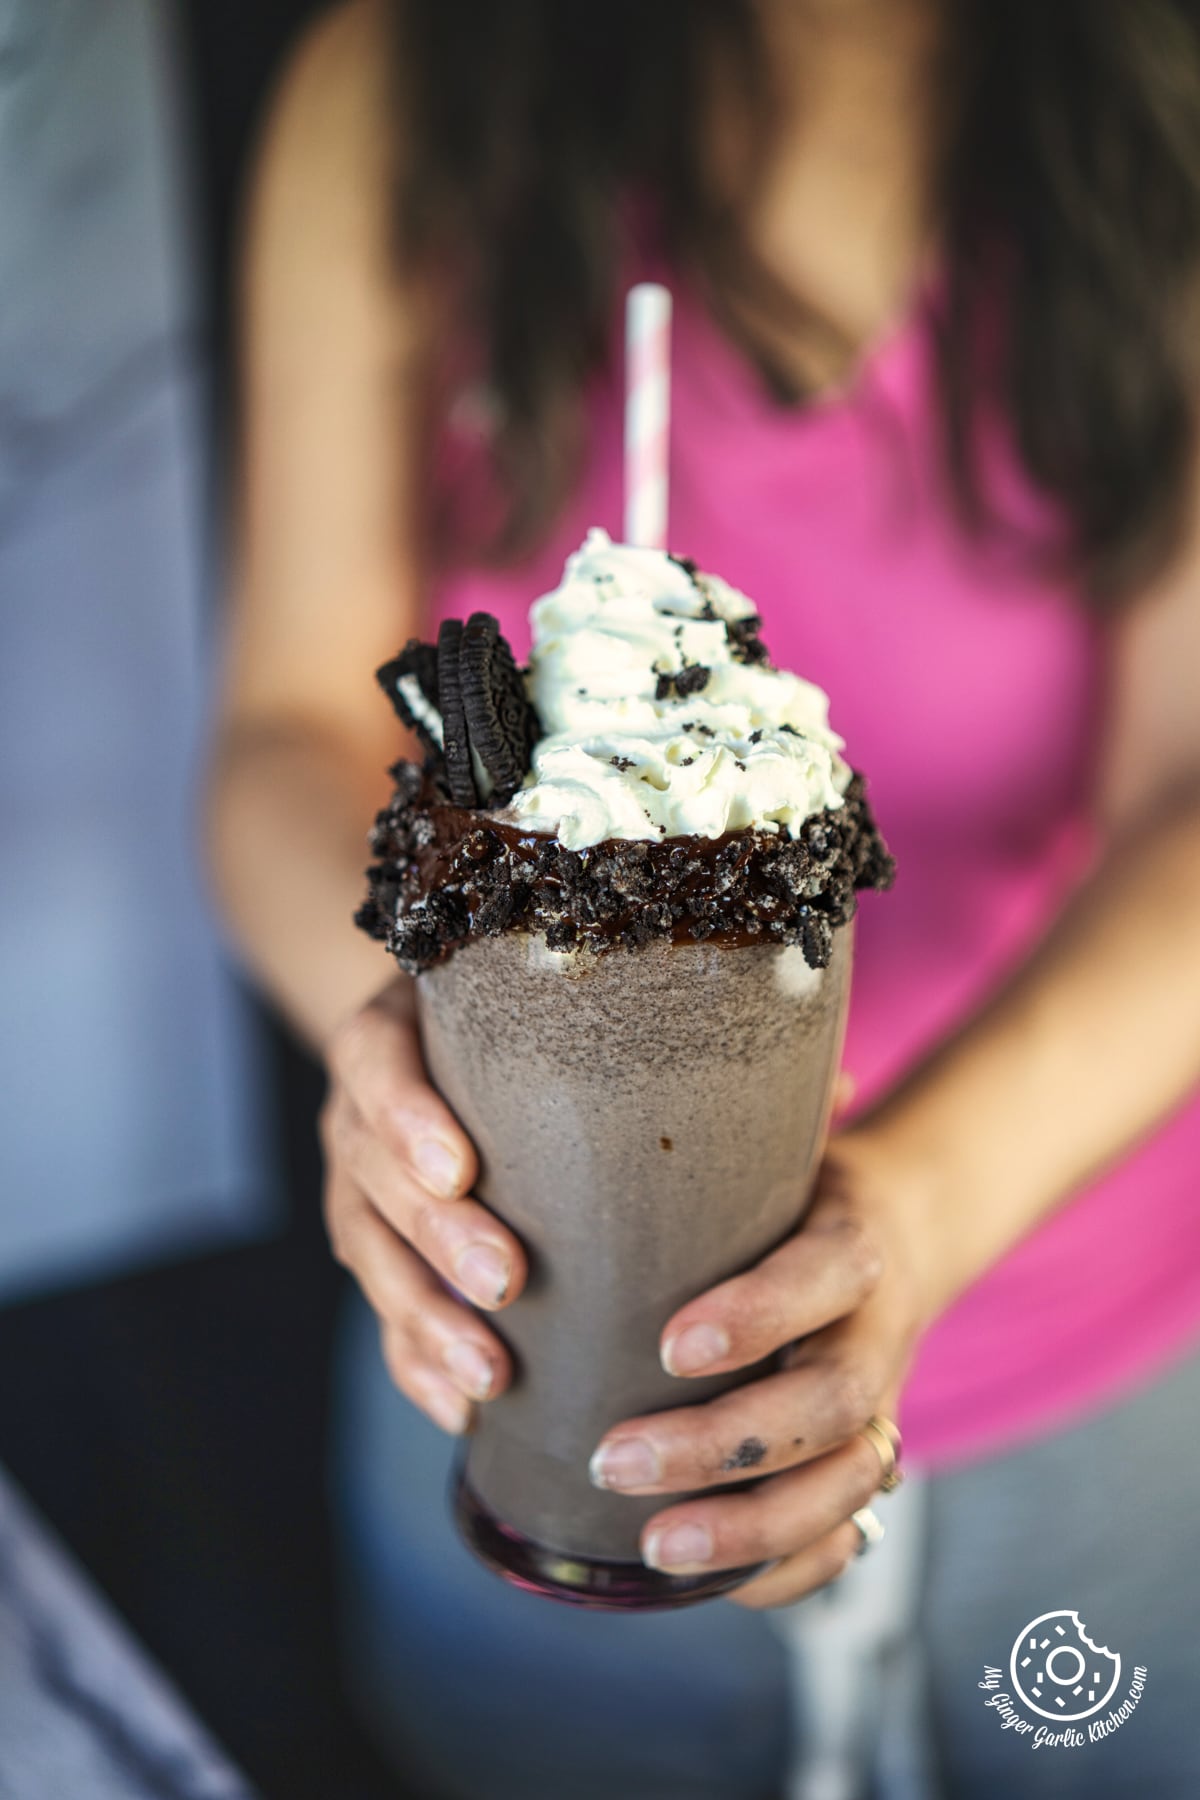 photo of a woman holding a Oreo Milkshake with whipped cream and oreo cookies